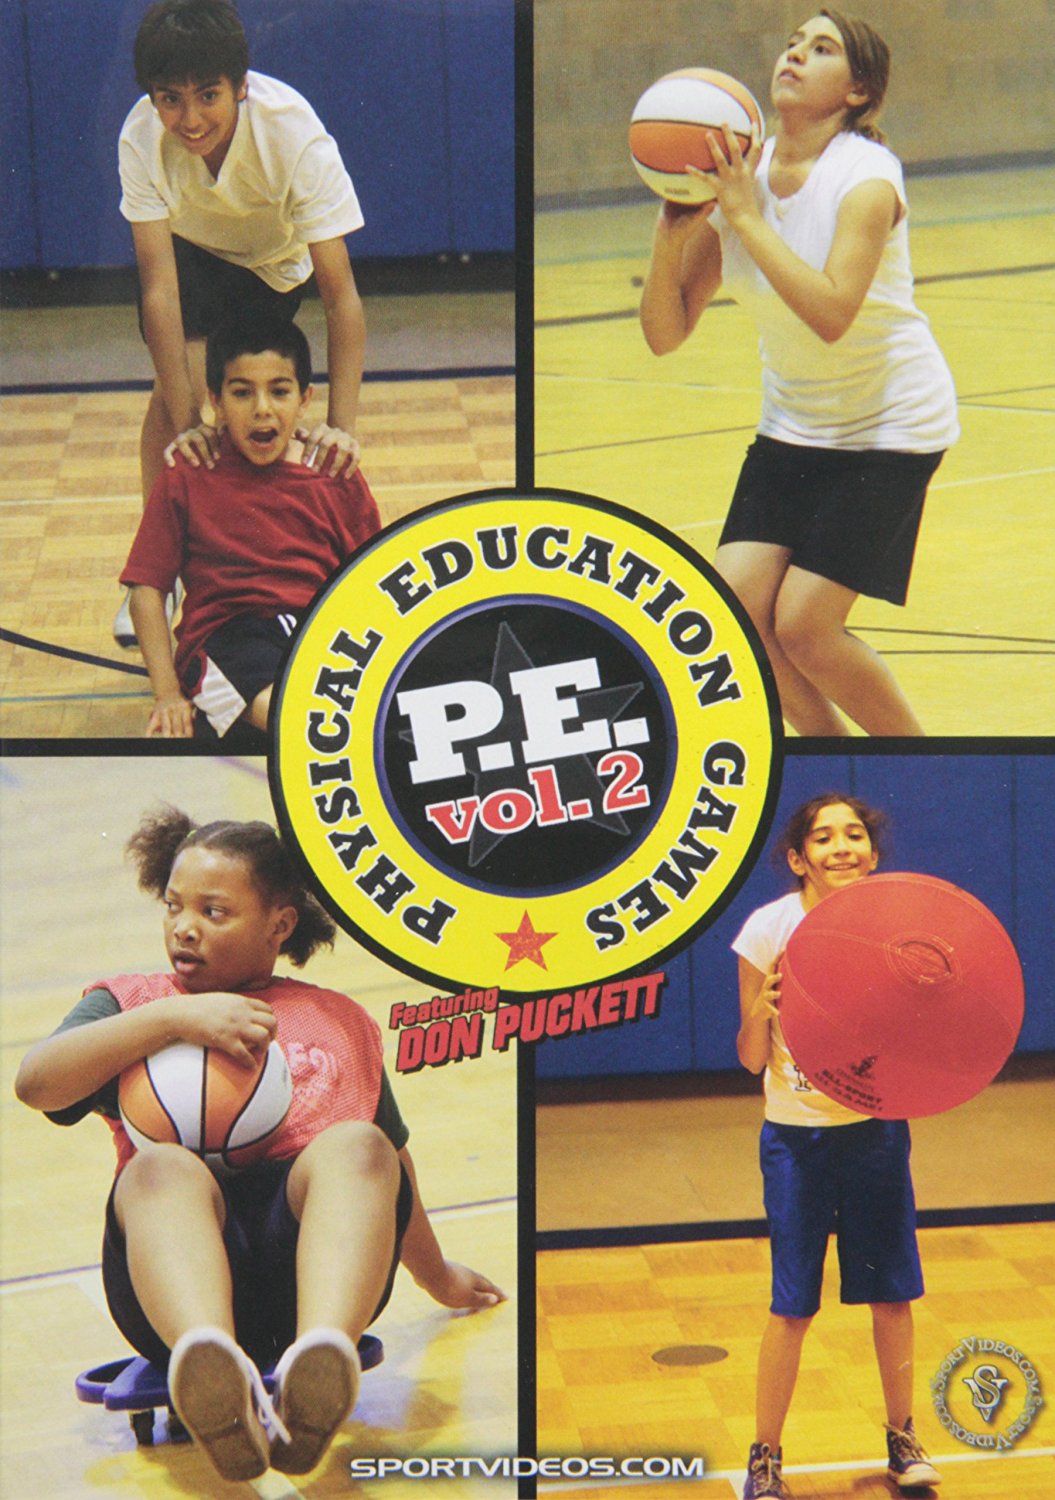 Physical Education Games Vol 2 DVD with Coach Don Puckett